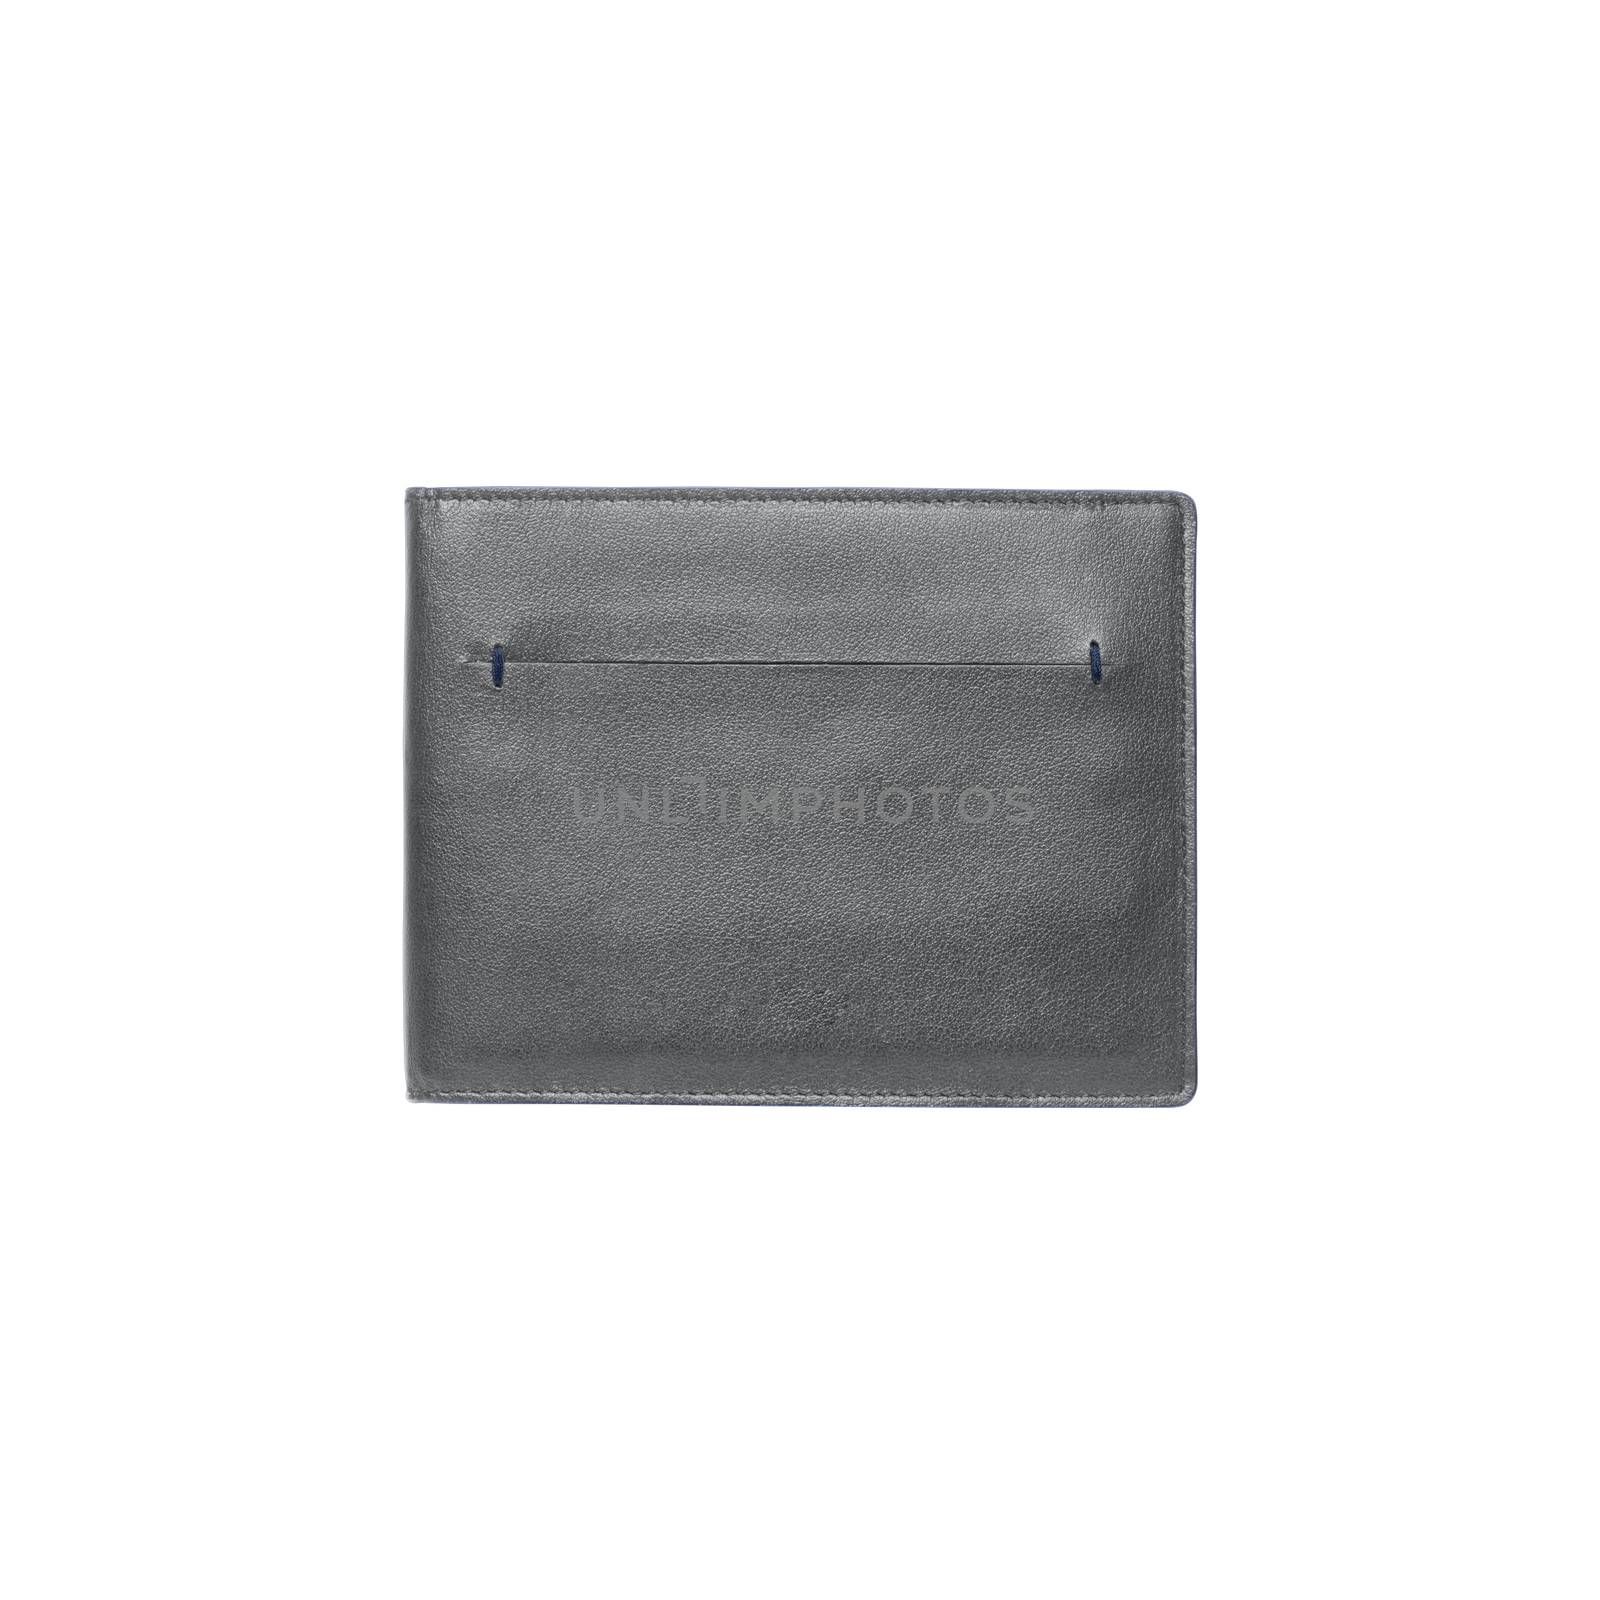 Gray leather wallet isolated on white background by uphotopia